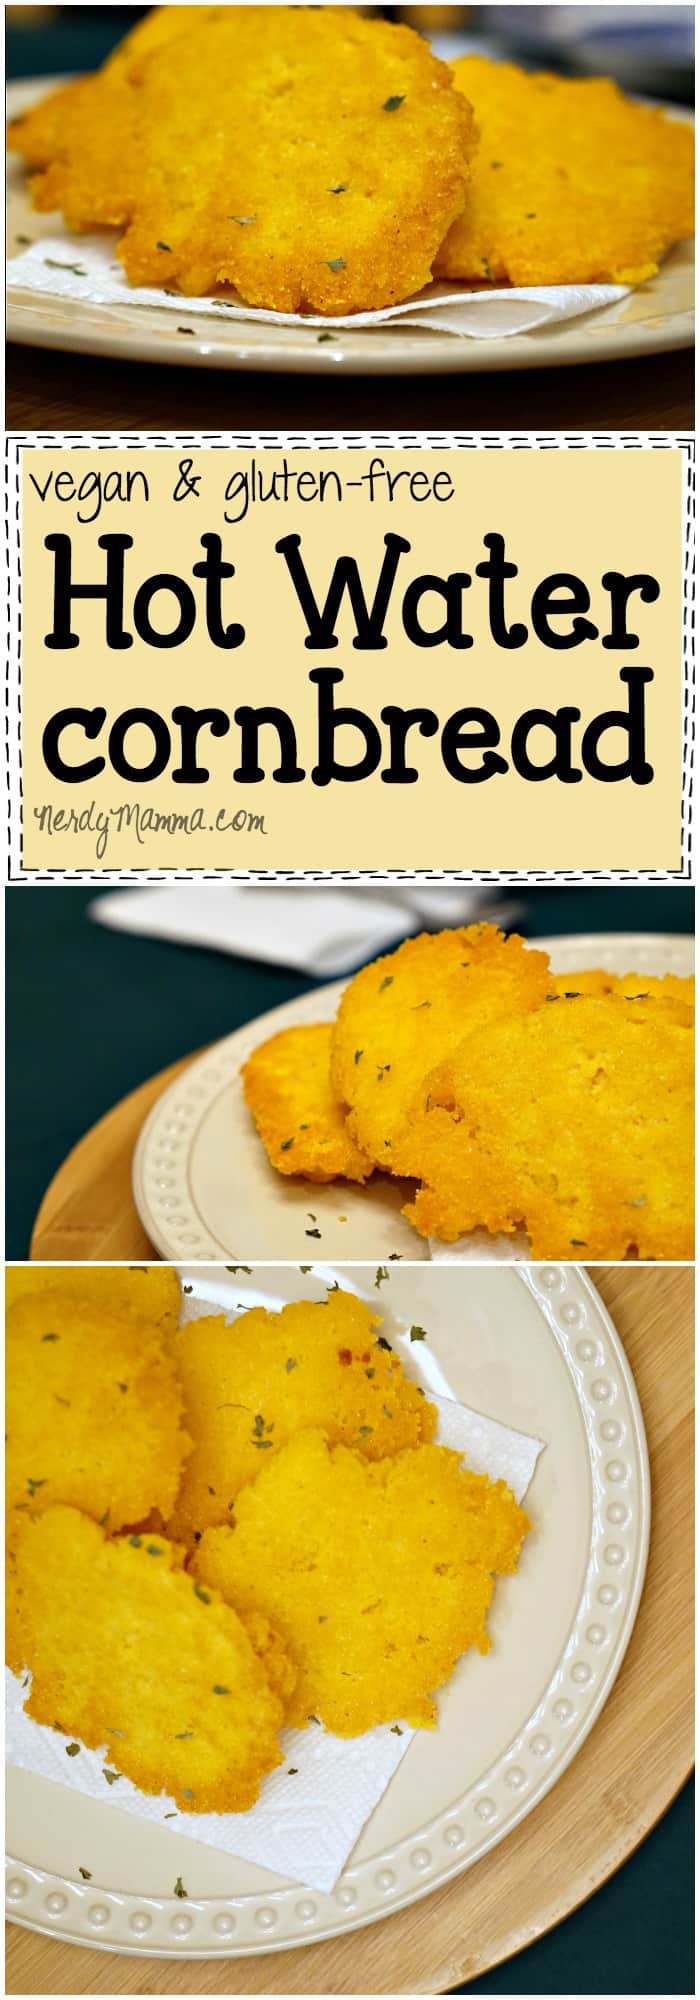 This easy recipe for vegan and gluten-free hot water cornbread is so awesome. I made it last week and....It. Just. Rocks.